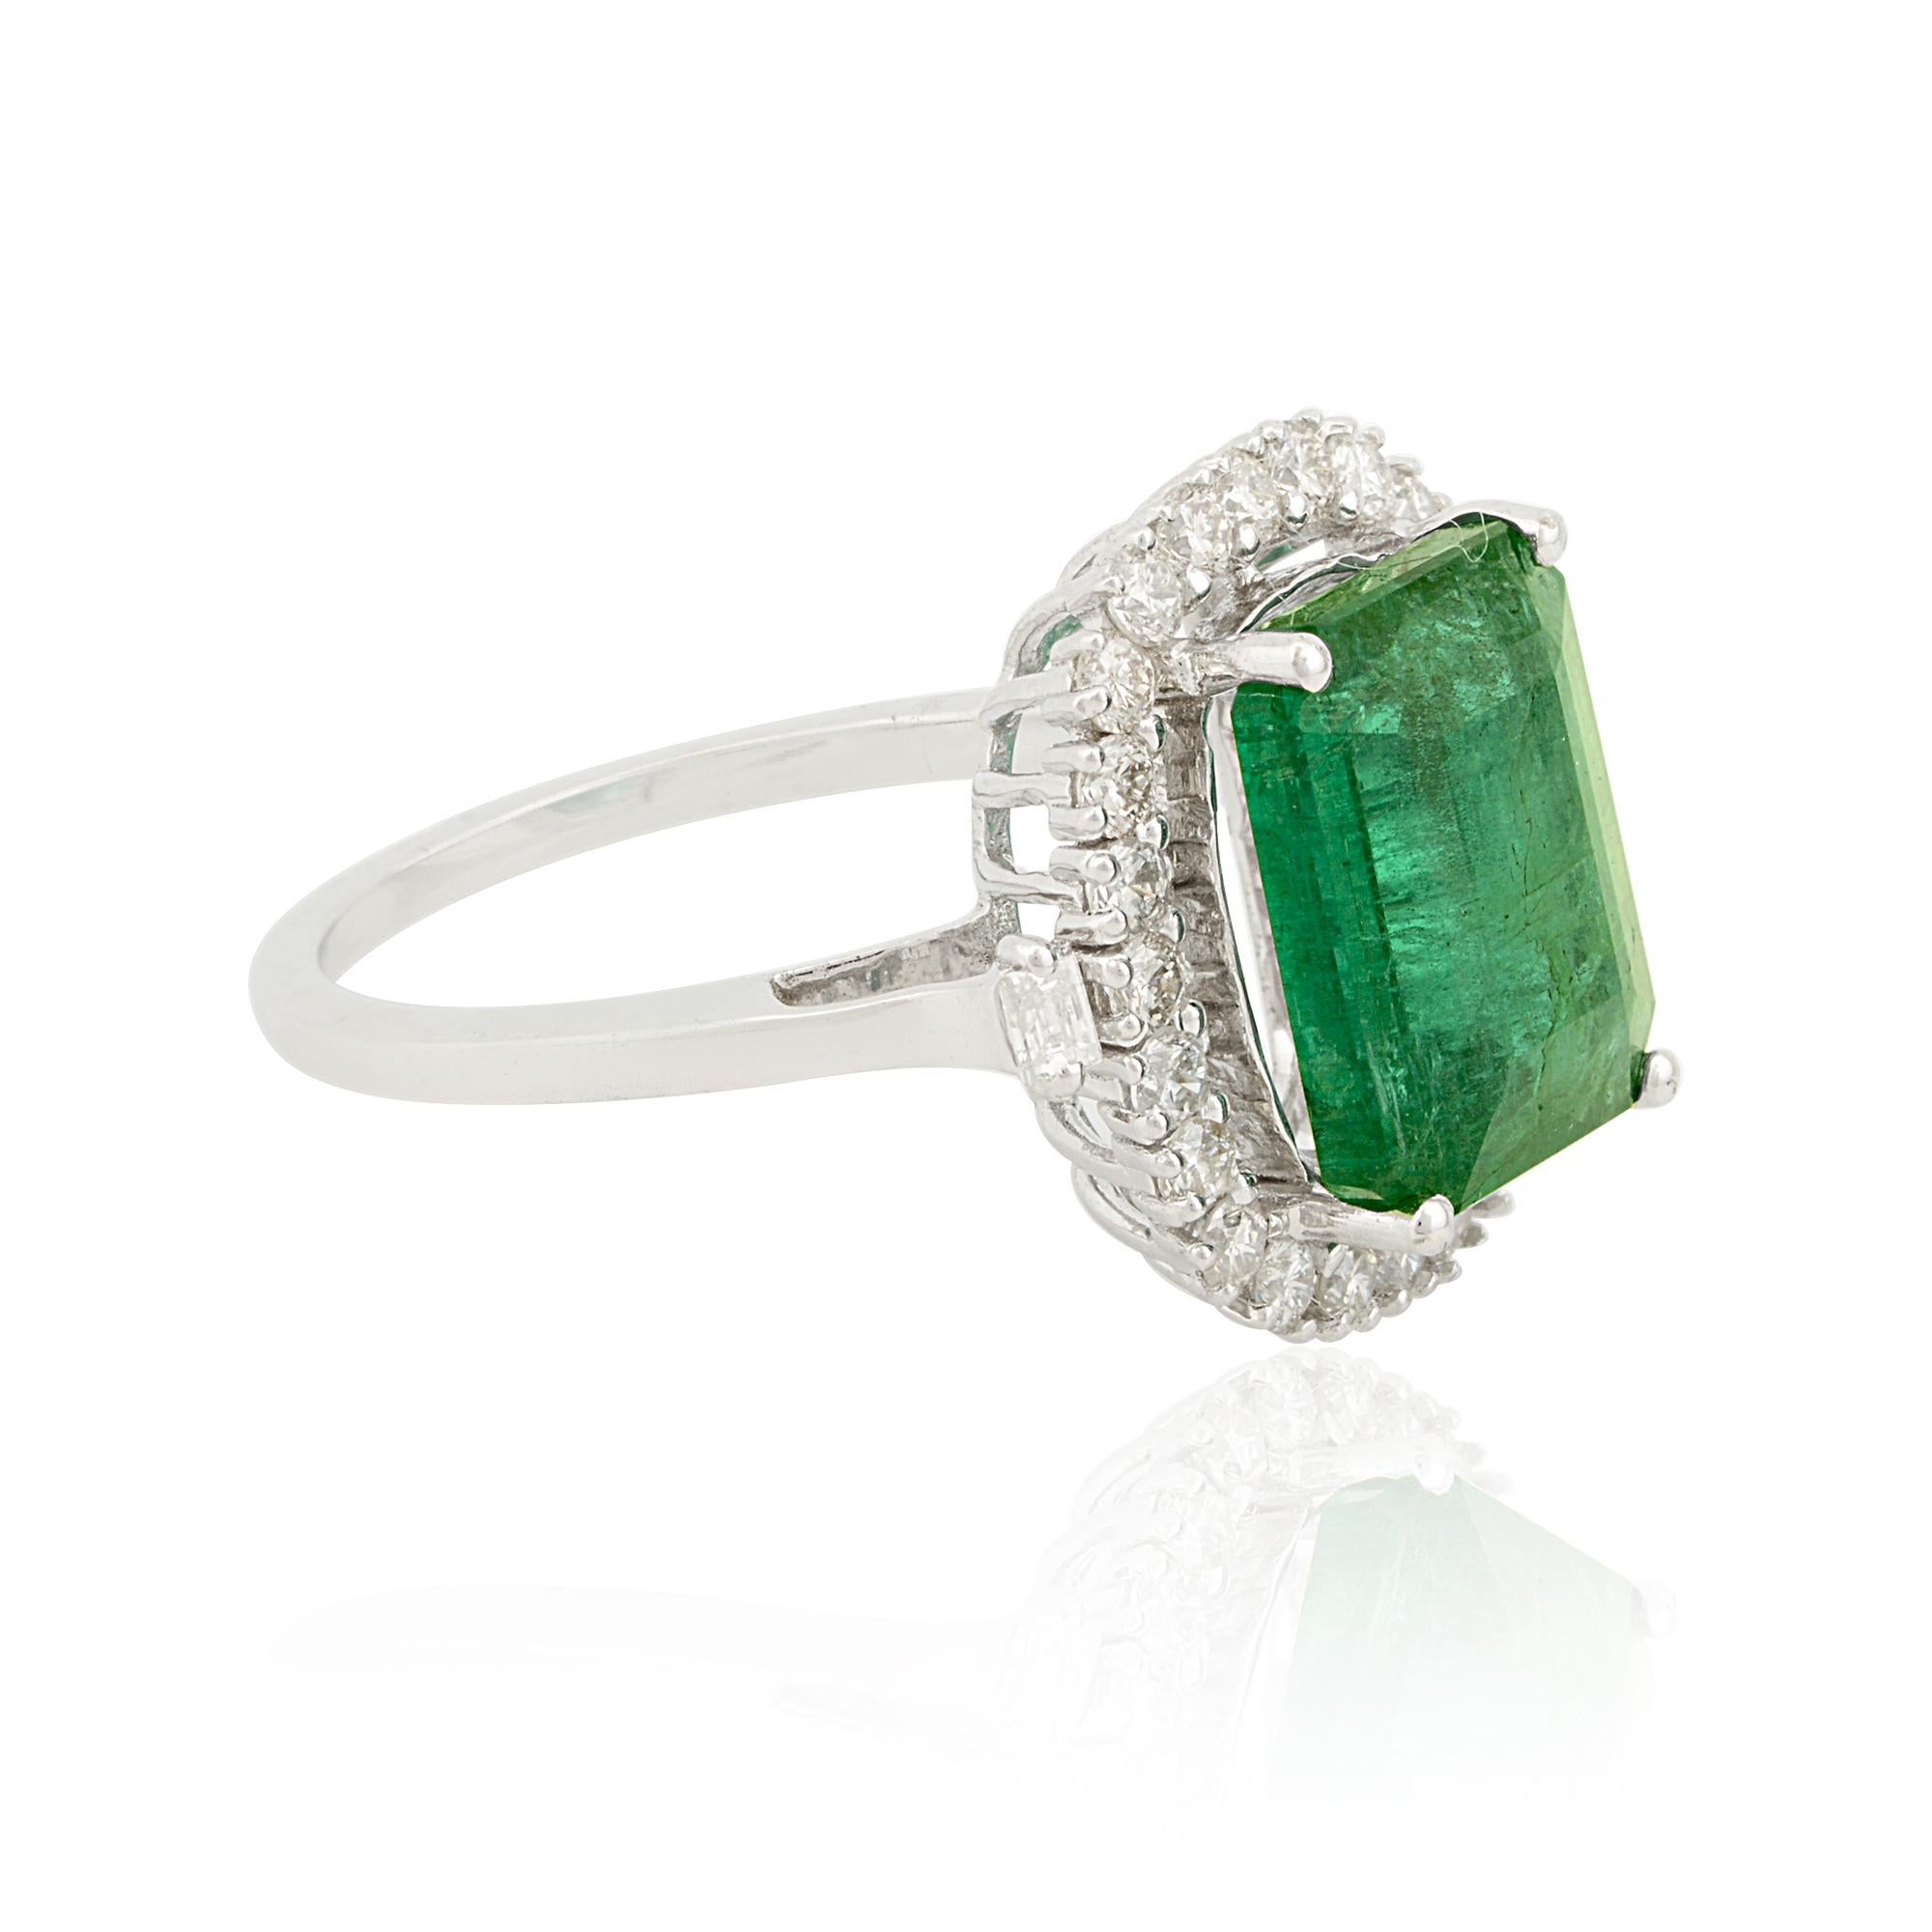 For Sale:  5 Carat Natural Emerald Cocktail Ring 0.75 Carat Diamond Jewelry 10K White Gold 3